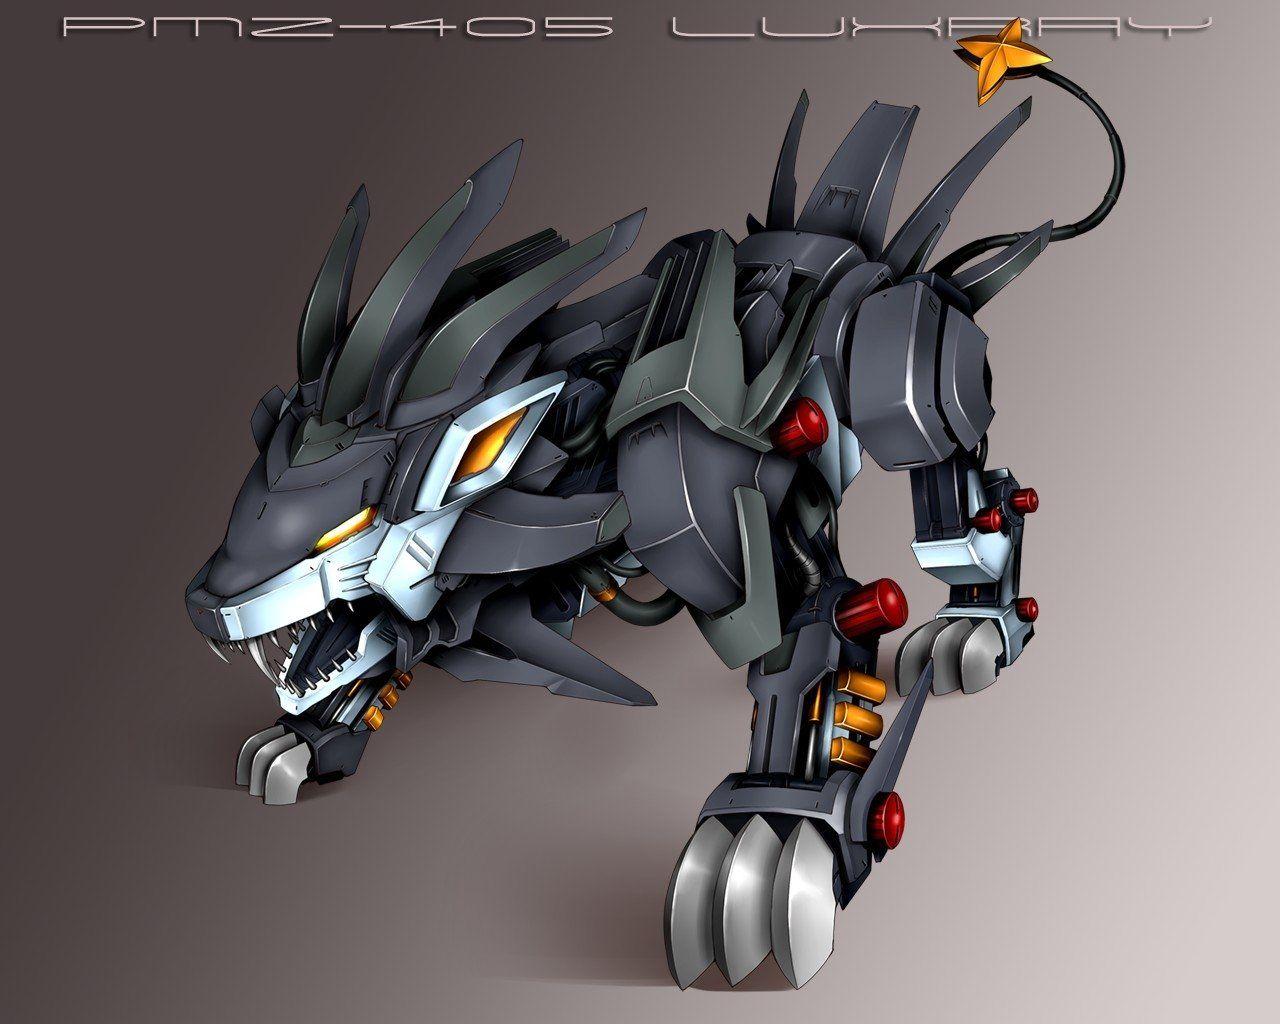 Zoids Wallpaper and Background Imagex1024